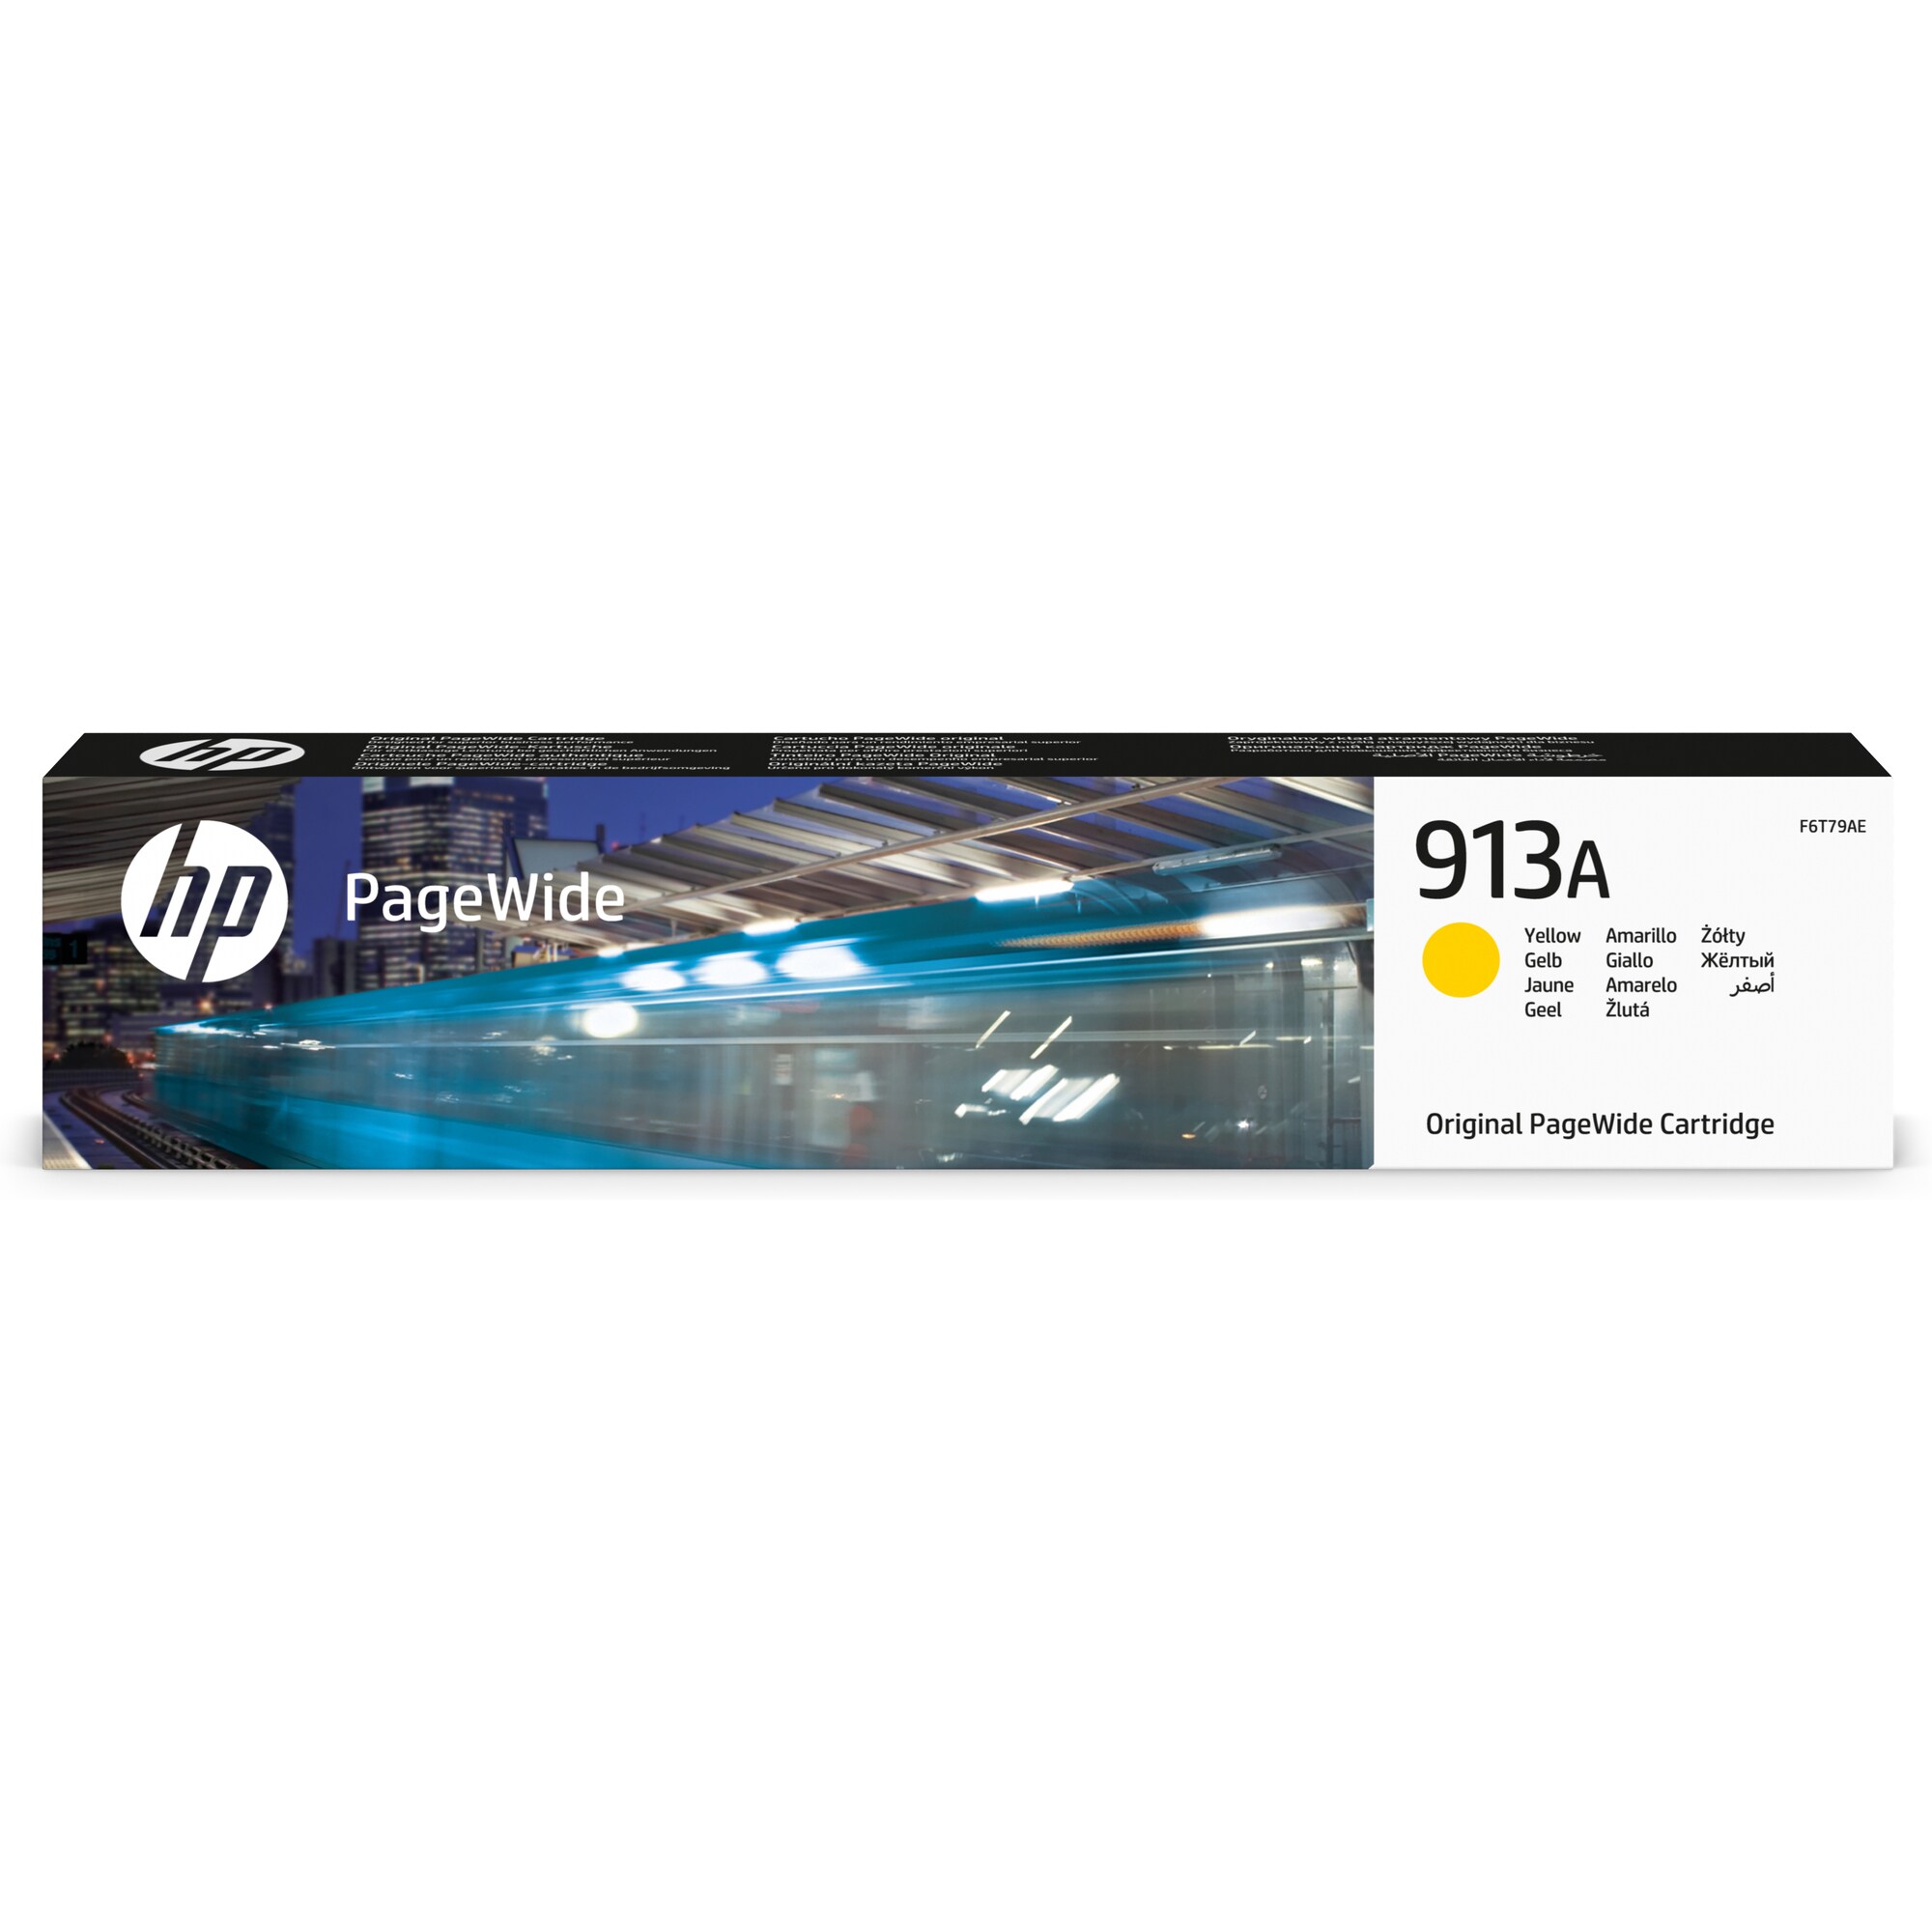 HP 913A Yellow Original PageWide Cartridge (3,000 pages)0 